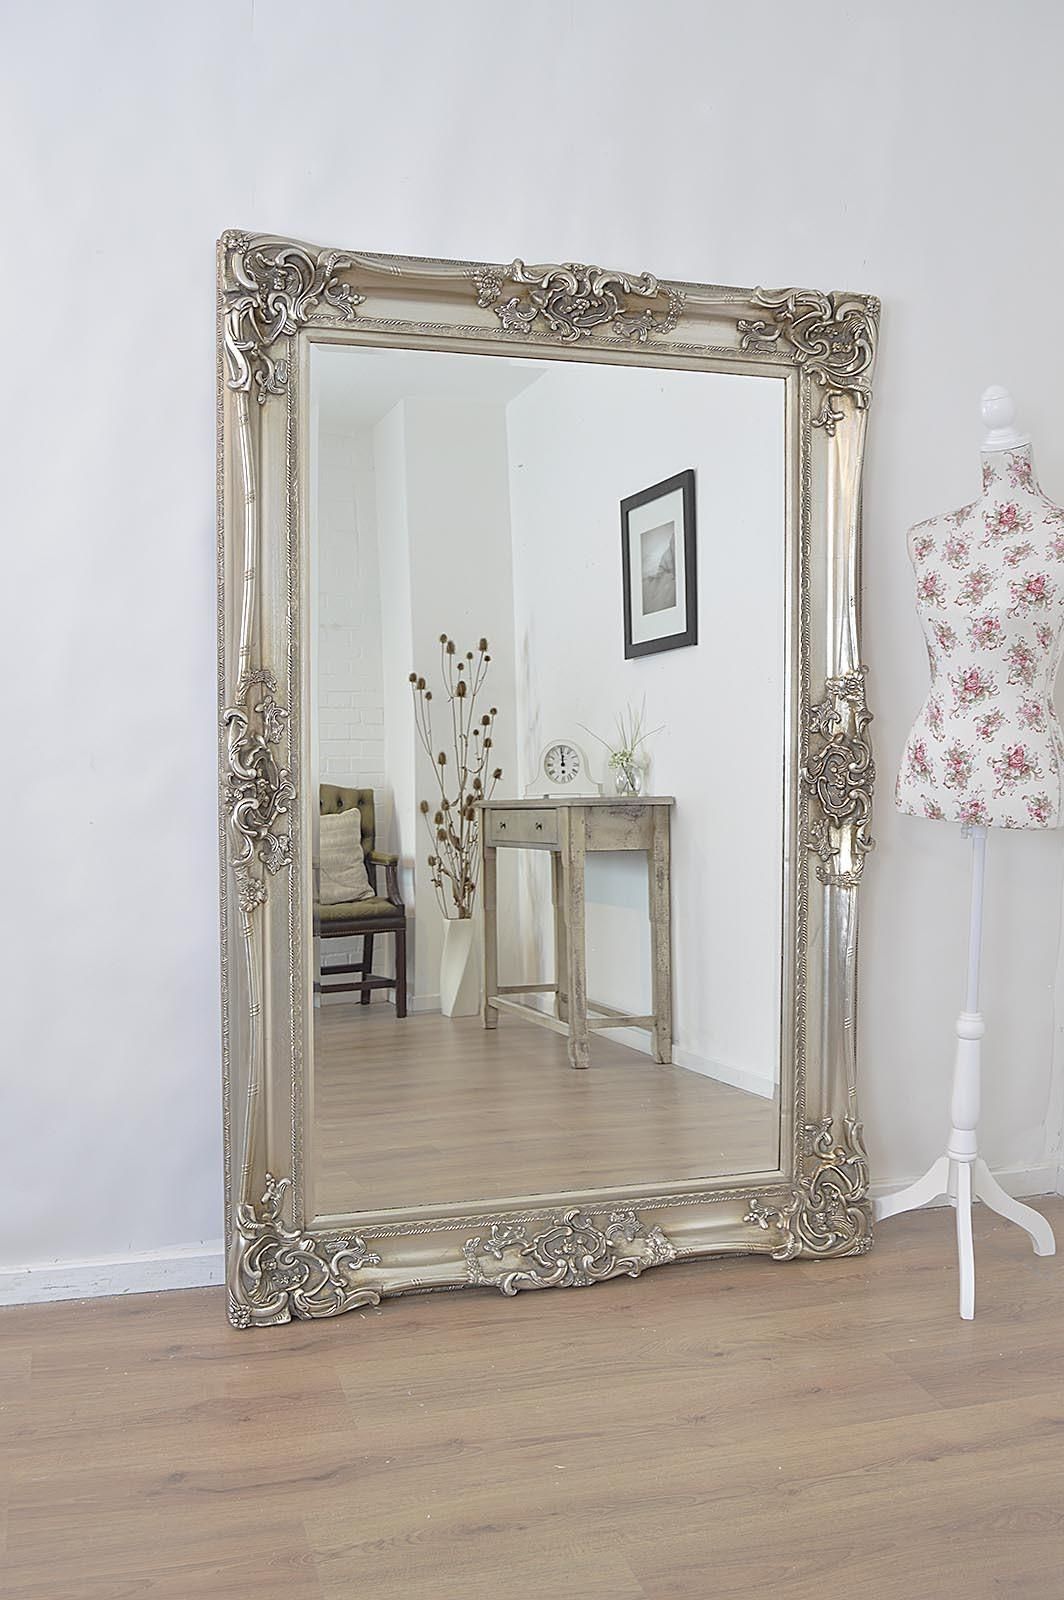 Vintage Mirrors For Sale Cape Town | Vanity And Nightstand Decoration Inside Antique Mirrors For Sale Vintage Mirrors (View 3 of 20)